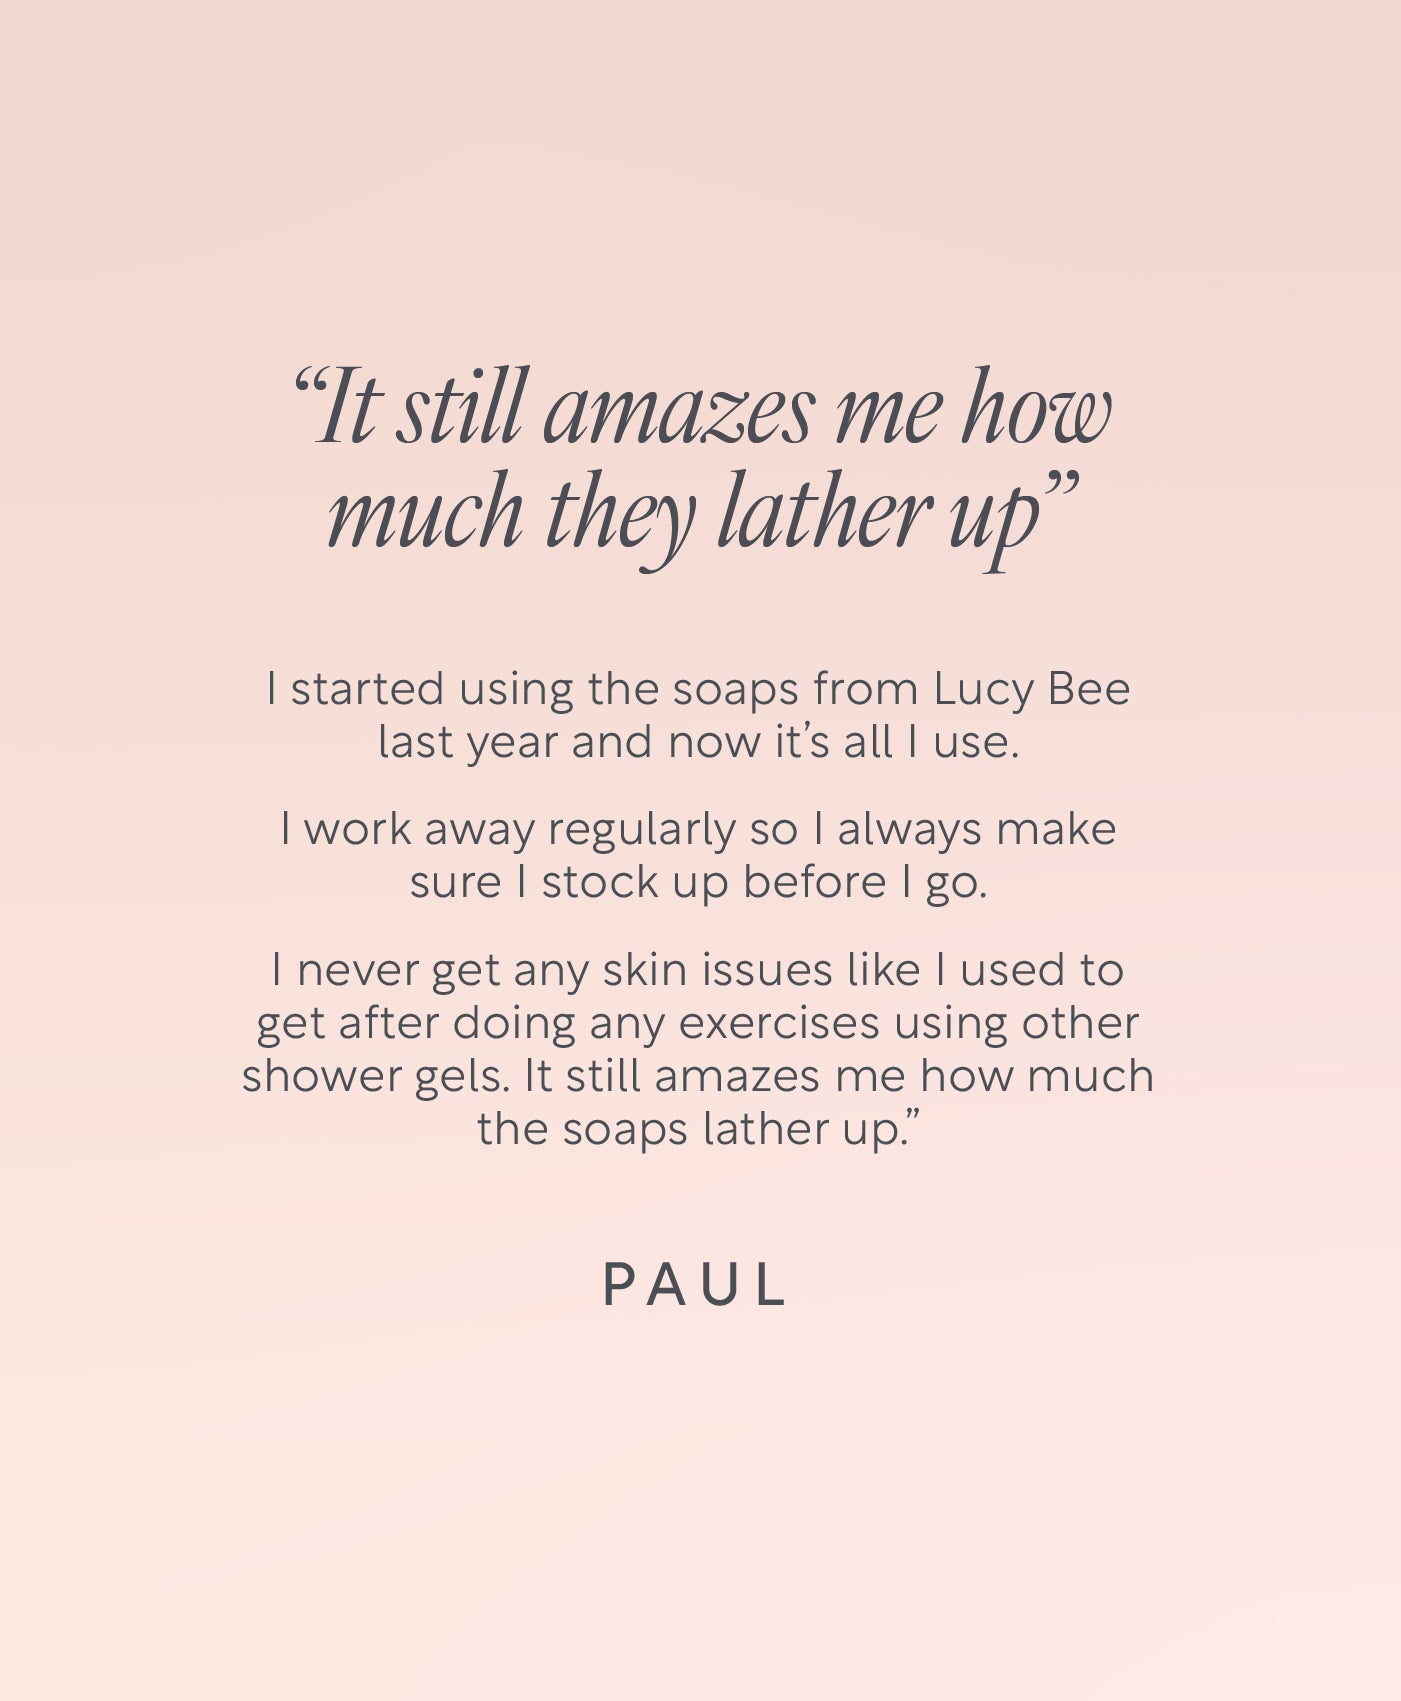 Ethical skincare from Lucy Bee